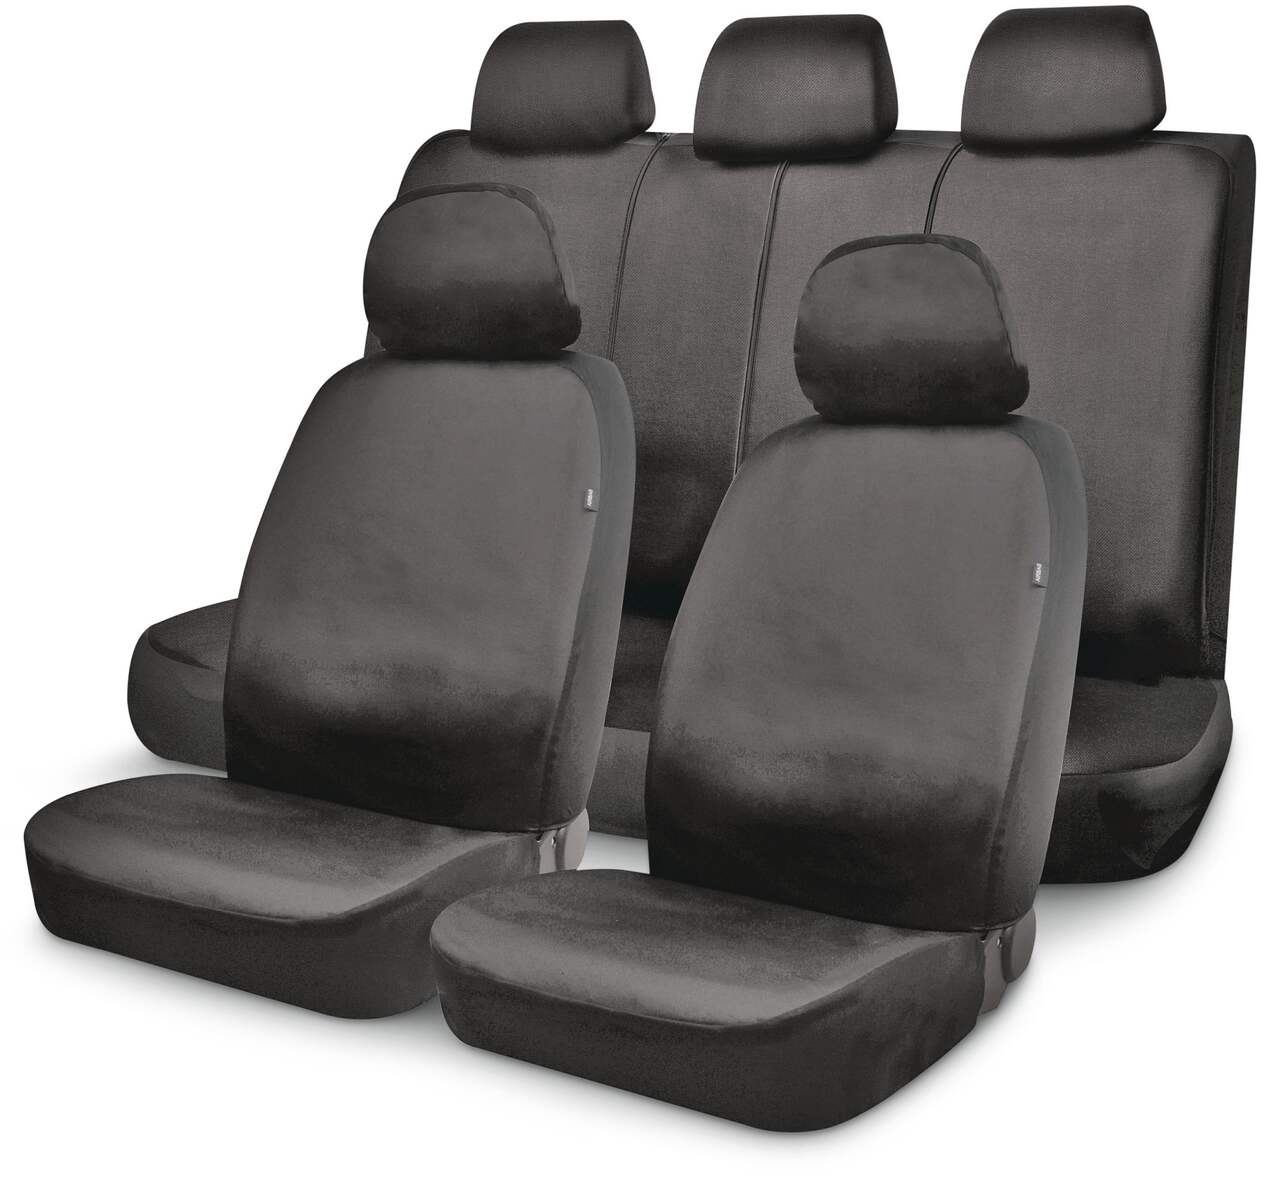 https://media-www.canadiantire.ca/product/automotive/car-care-accessories/auto-comfort/0320161/autotrends-heavy-duty-truck-seat-cover-kit-3-piece-black-ed2f00db-a759-49bf-9747-6392f62a57f5-jpgrendition.jpg?imdensity=1&imwidth=640&impolicy=mZoom